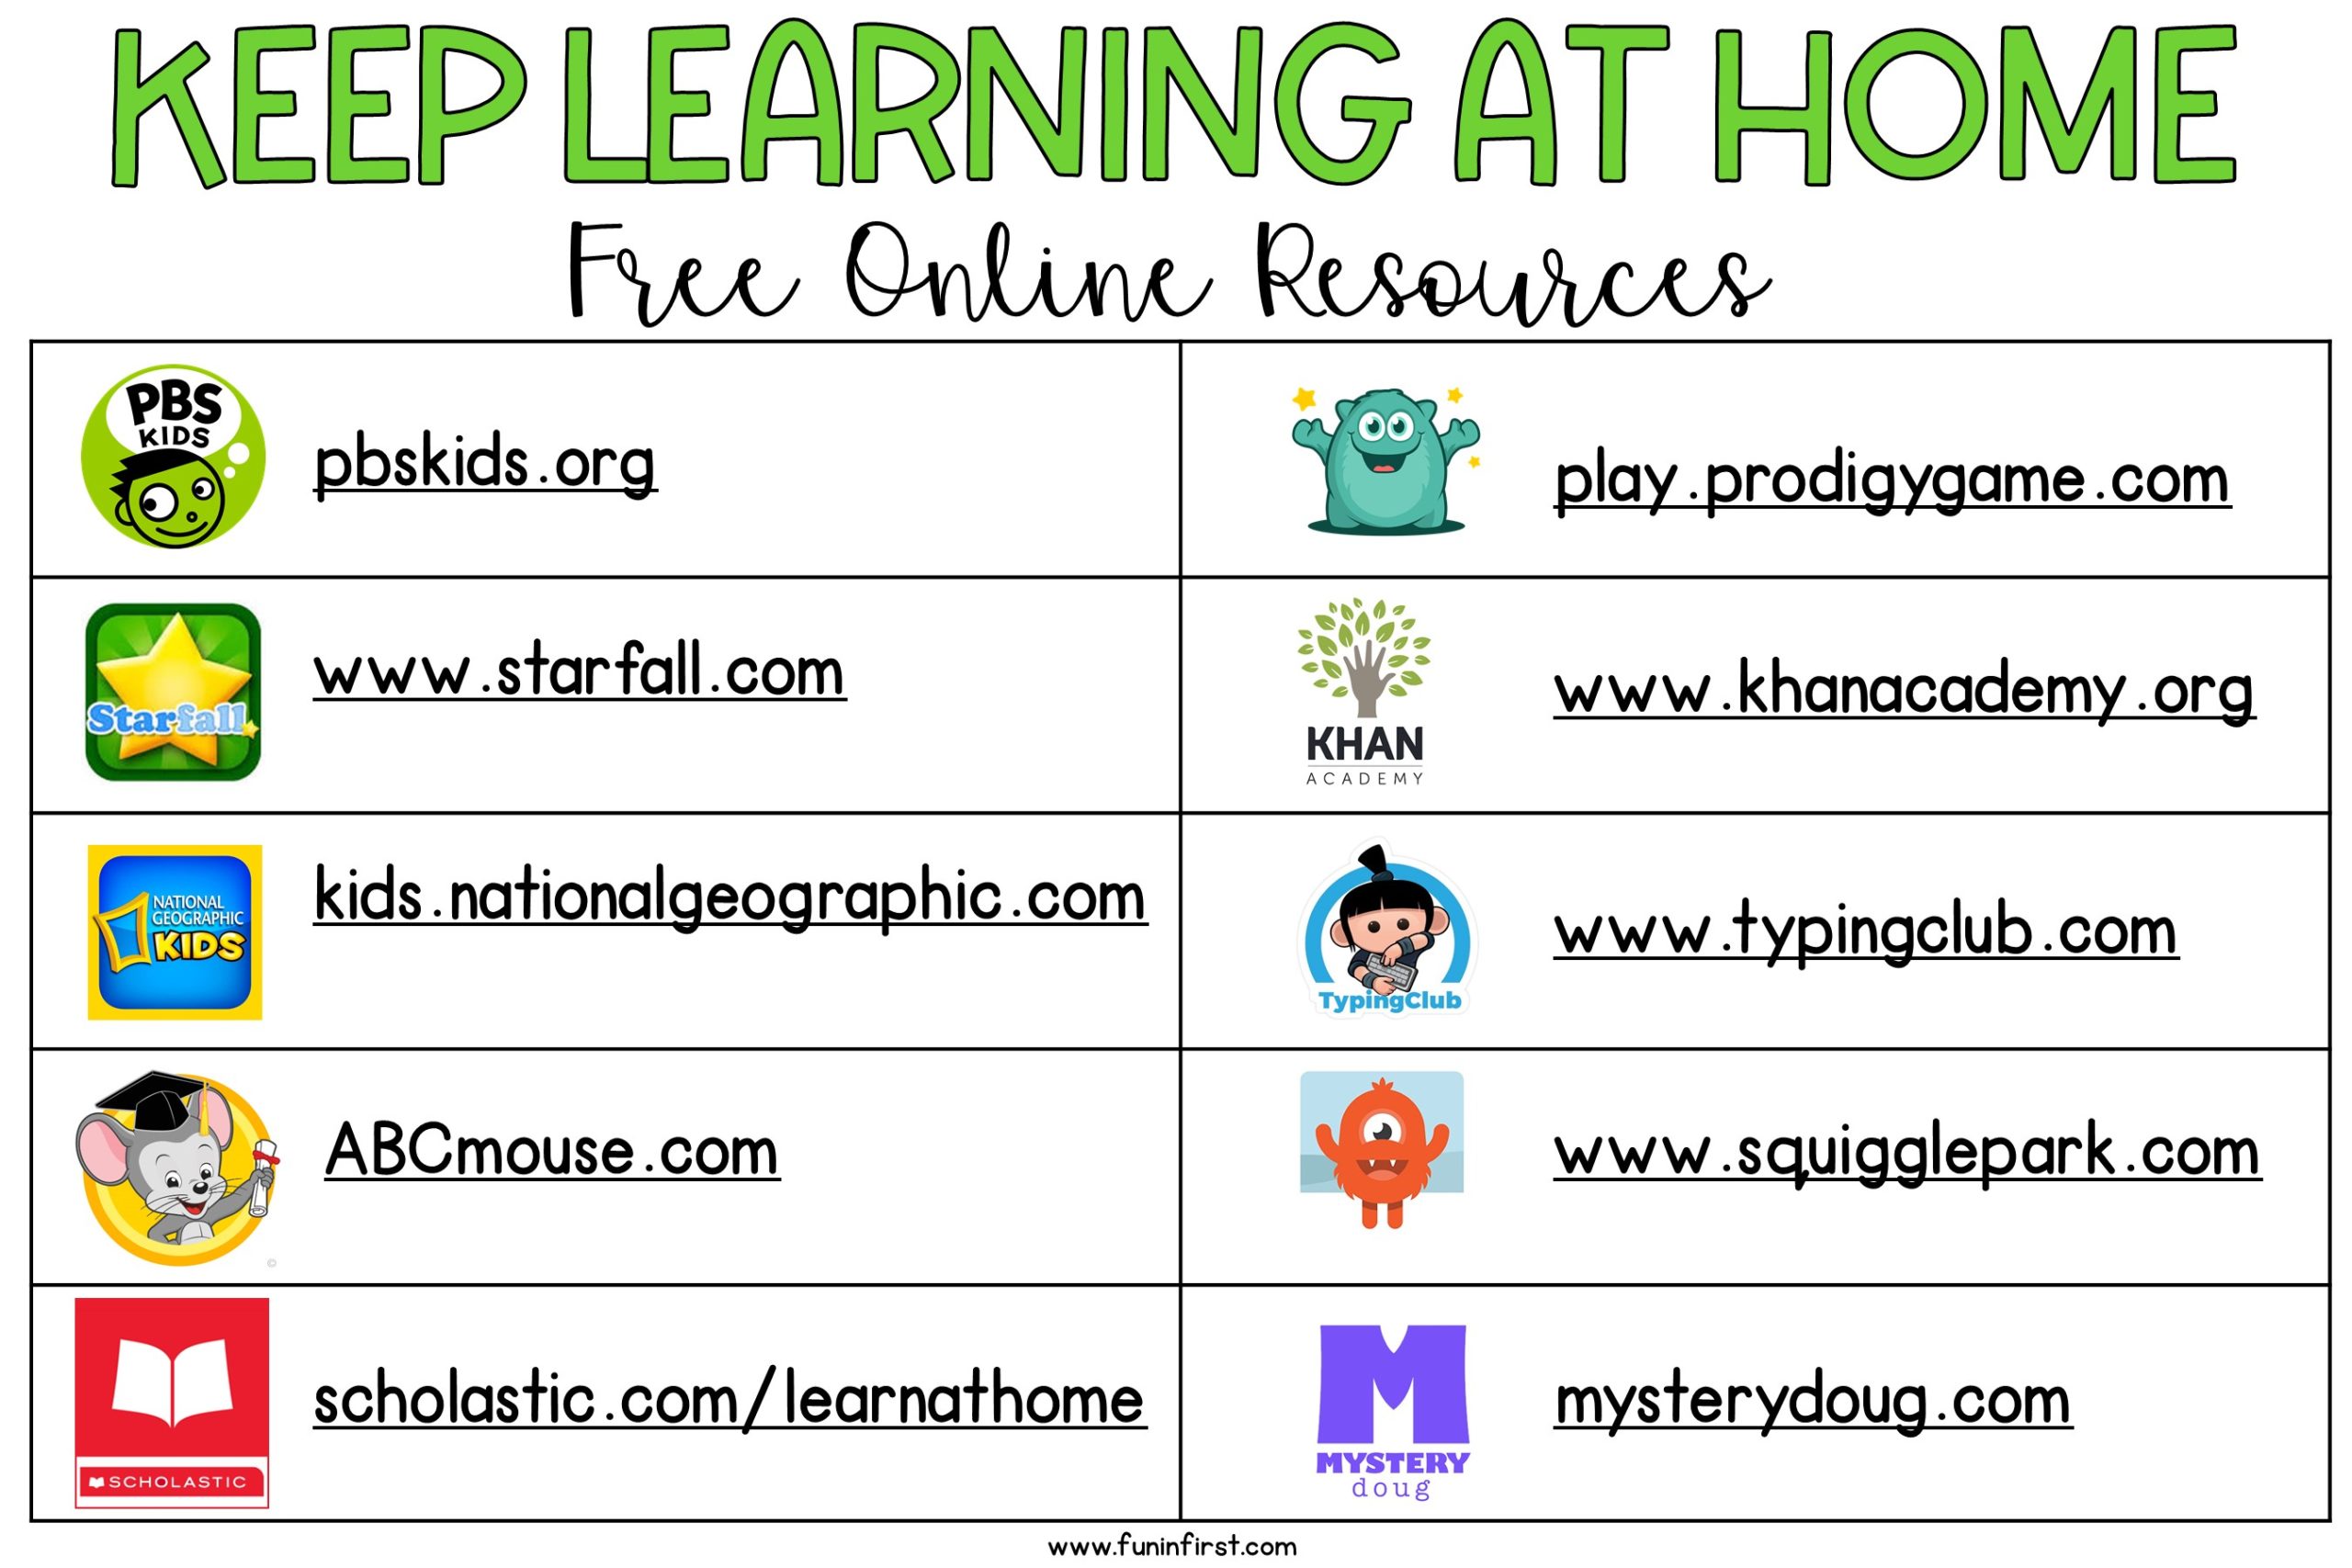 FREE Online Learning at Home